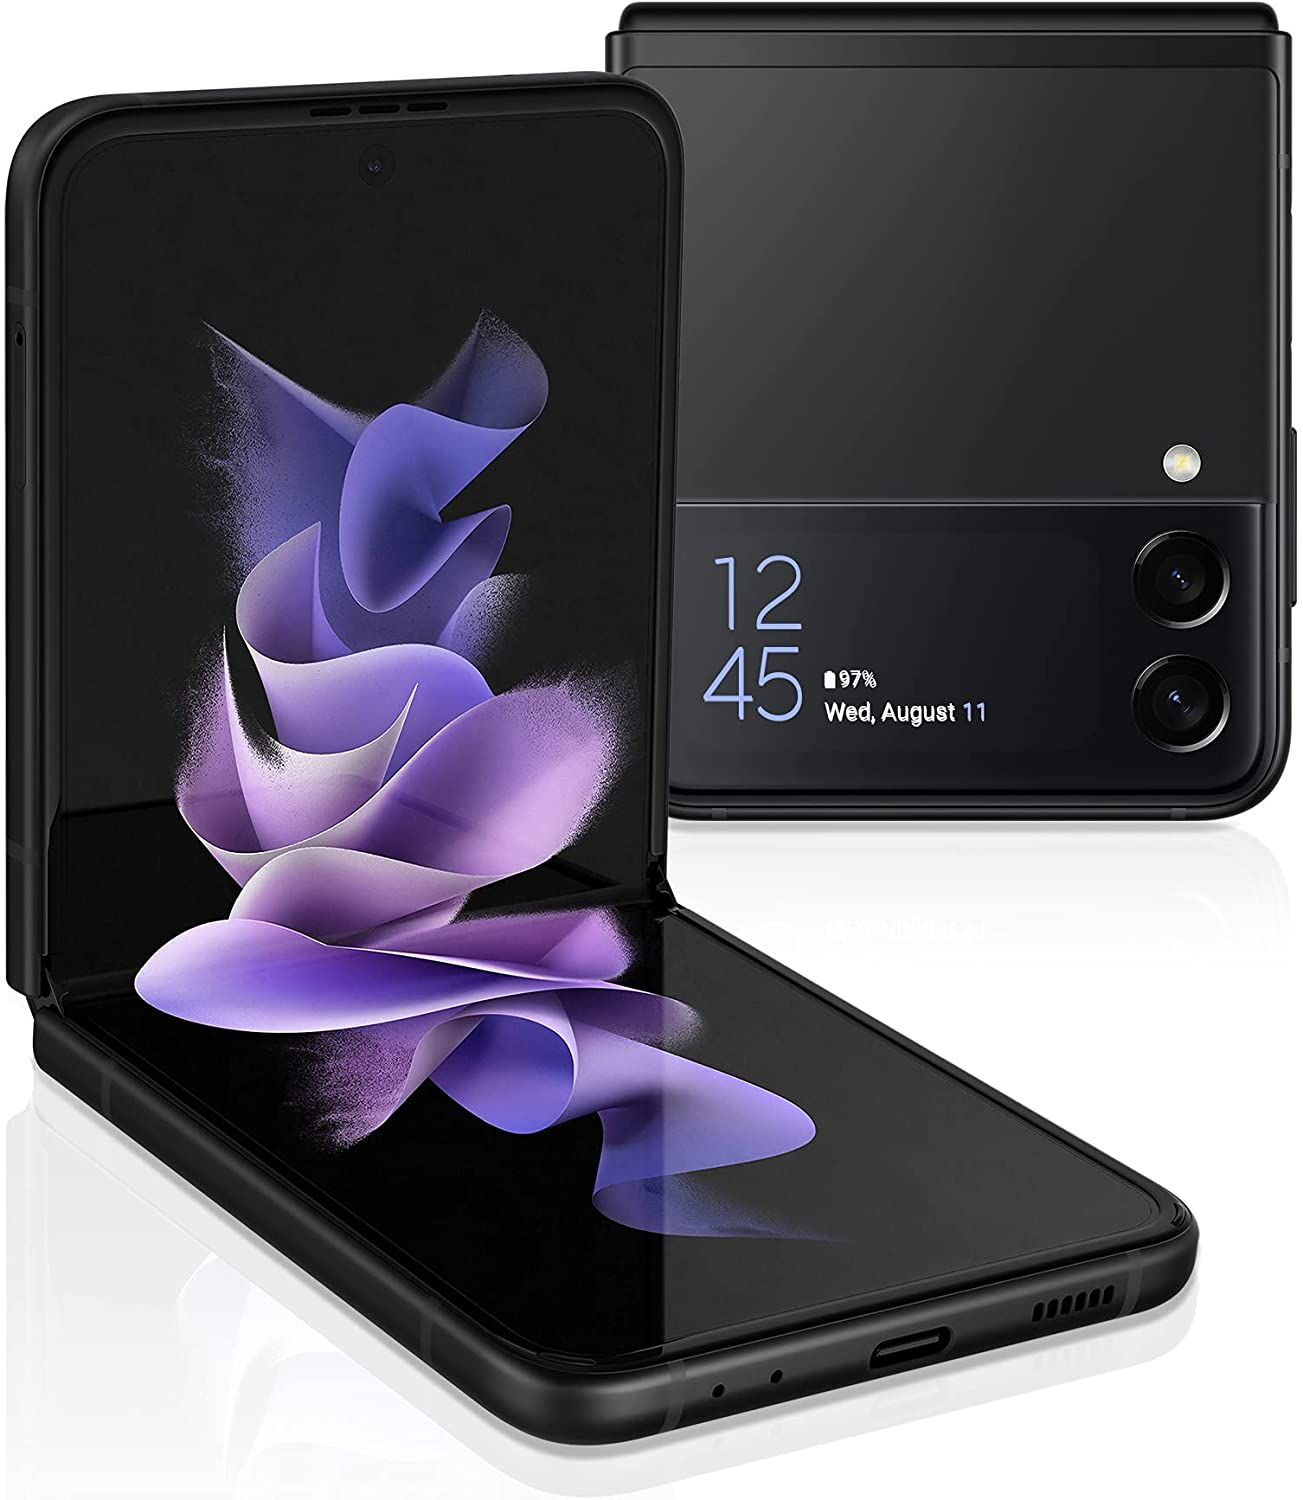 Samsung Galaxy Z Flip3 from the front